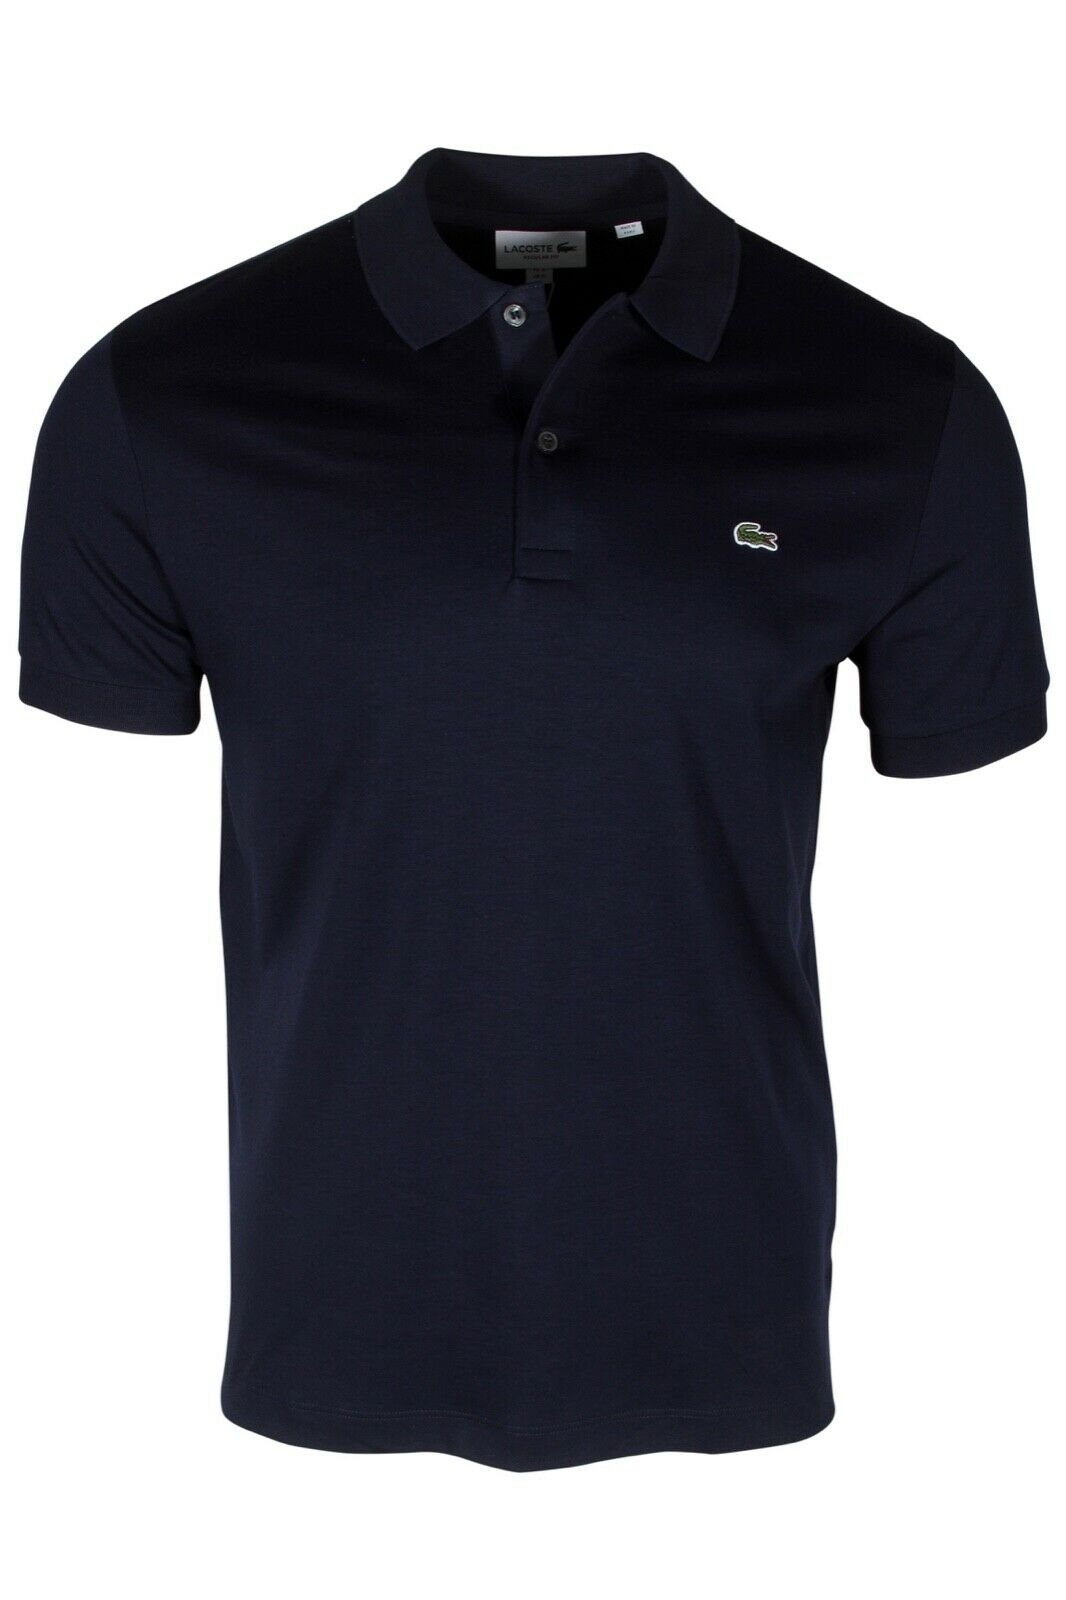 Lacoste Men's Regular Fit Soft Pima Cotton Polo Shirt in Navy Blue DH2050-51 166